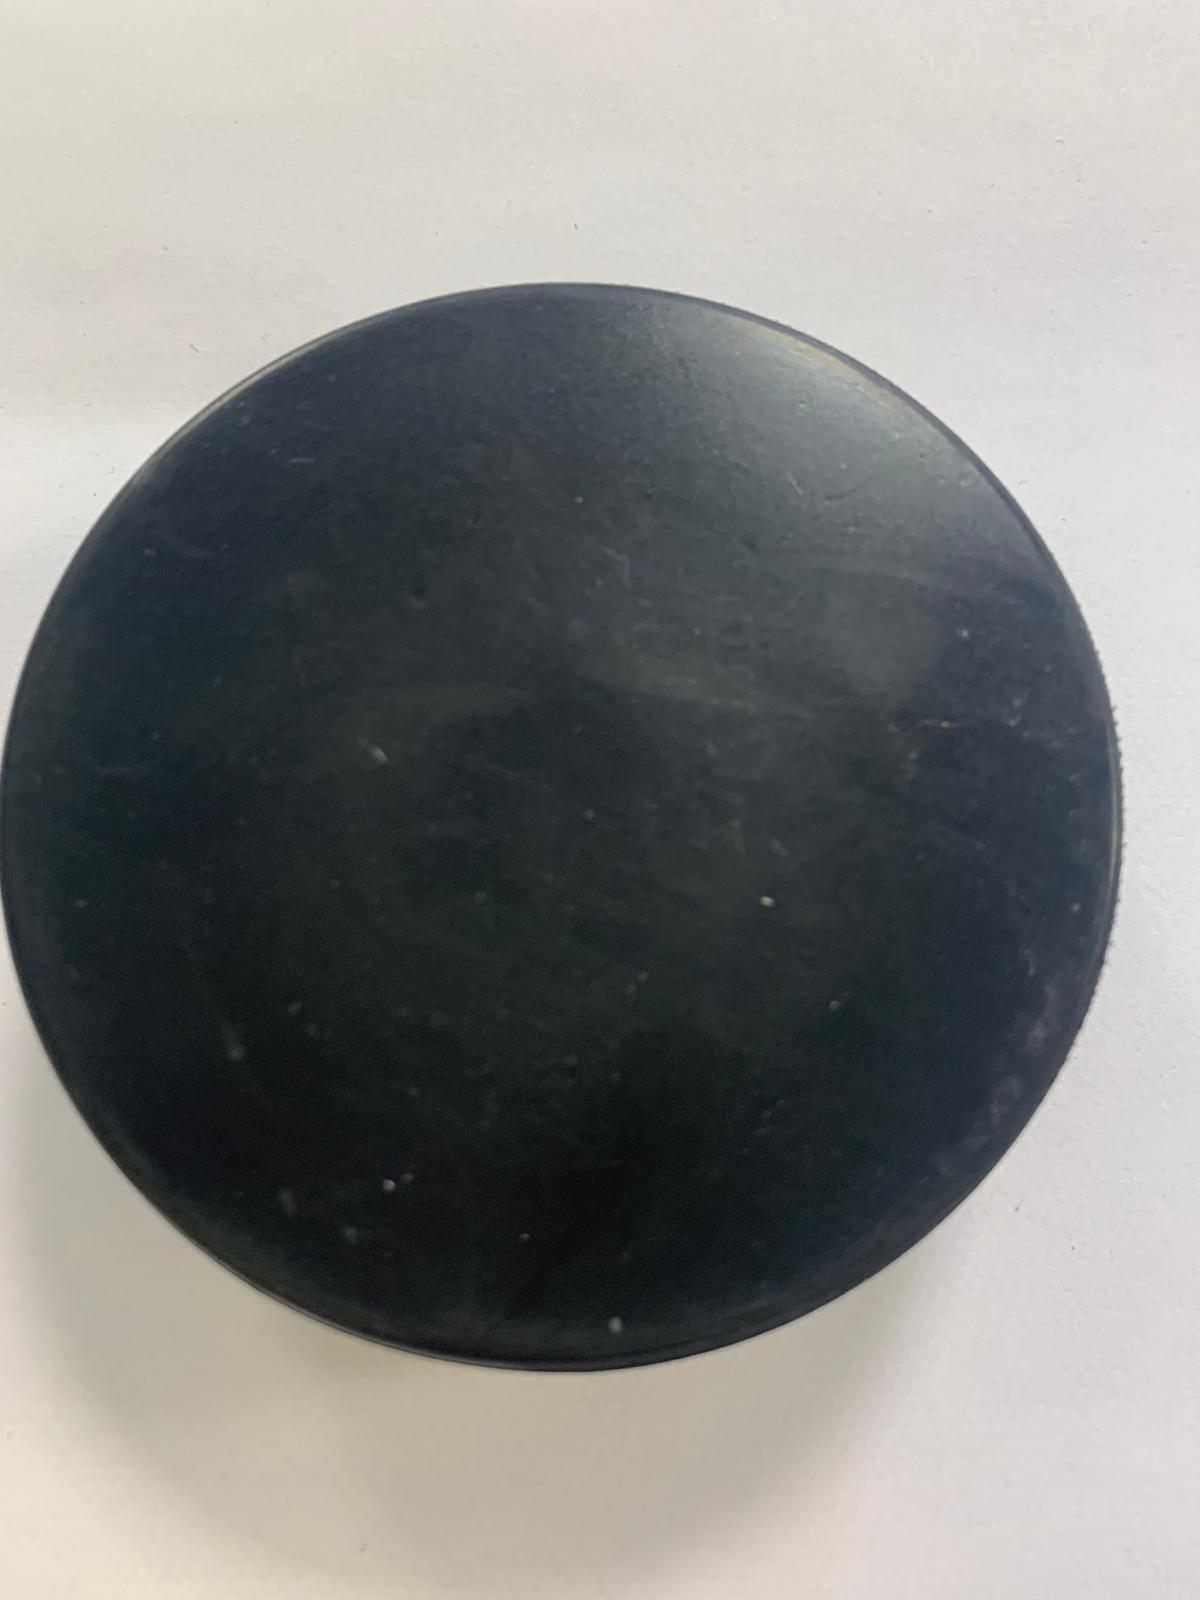 Ice Hockey Puck Signed by GB International Matthew Myers with protective plastic case